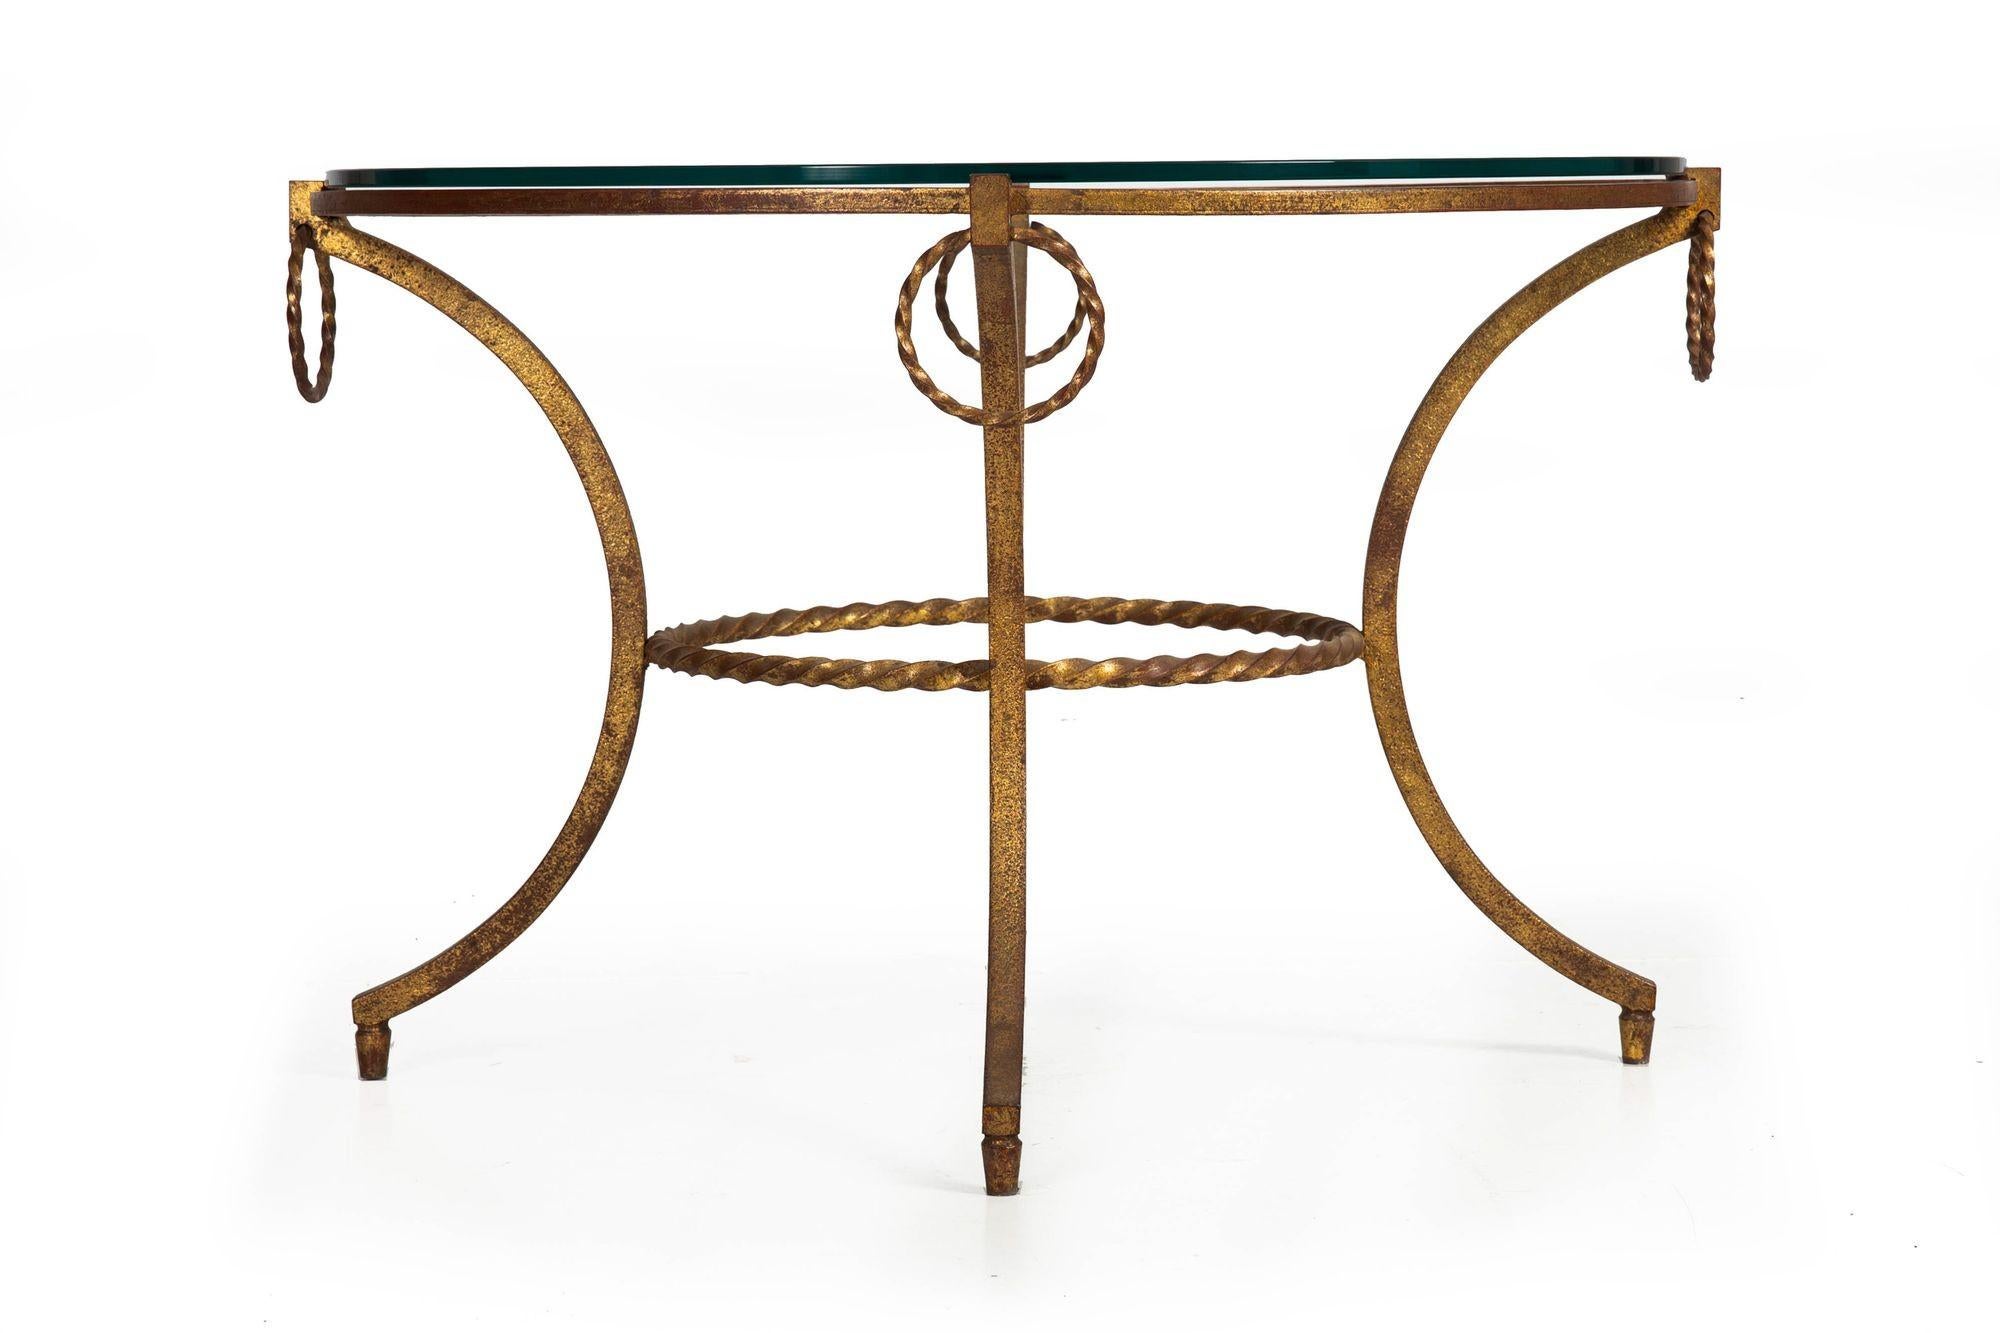 20th Century French Modernist Gilded Wrought-Iron & Glass Coffee Accent Table ca. 1950s For Sale